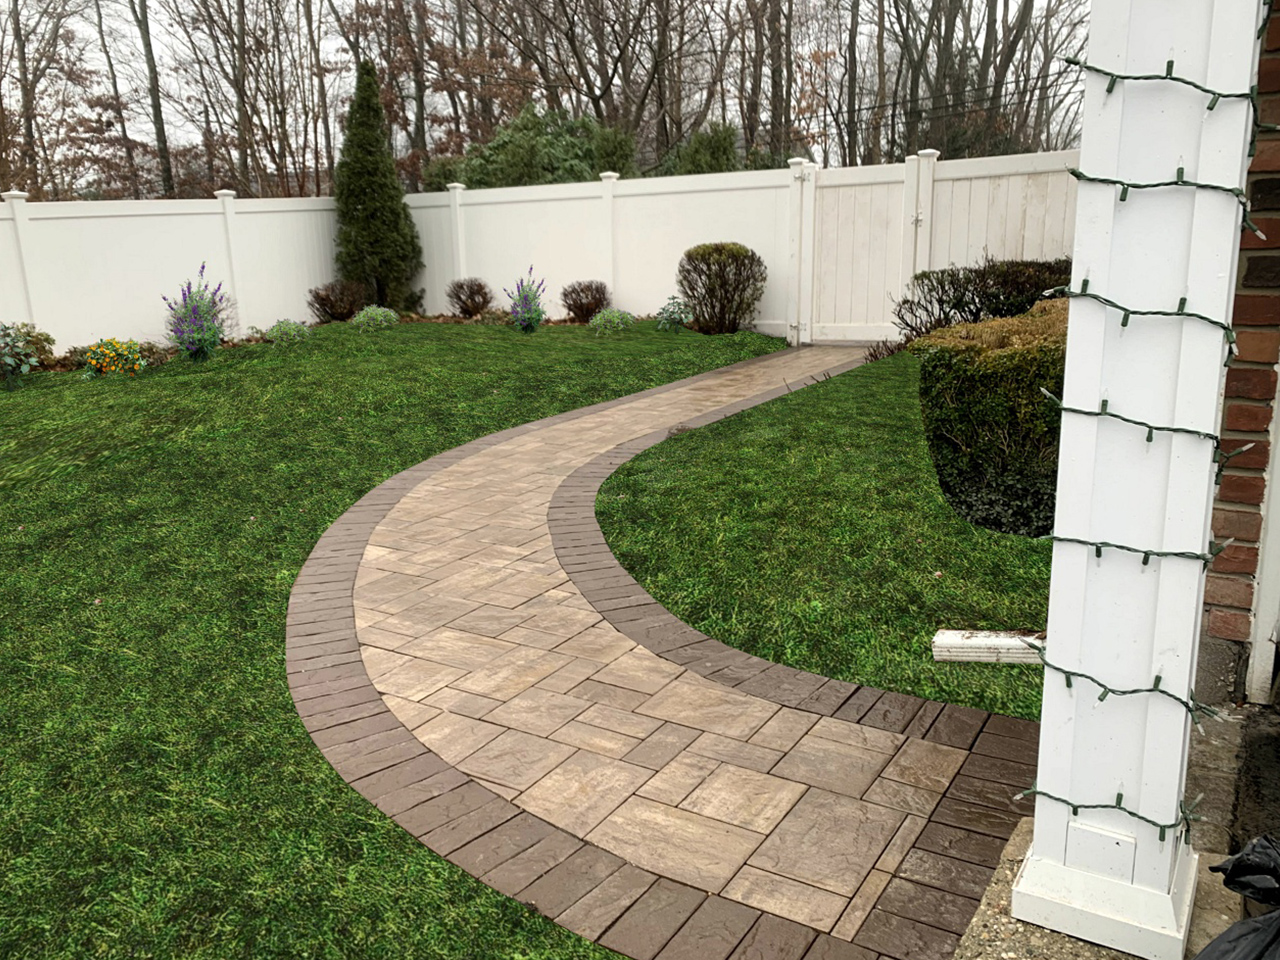 paver walkway installation. A picturesque pathway created by Affordable Patio, guiding visitors through a serene garden setting